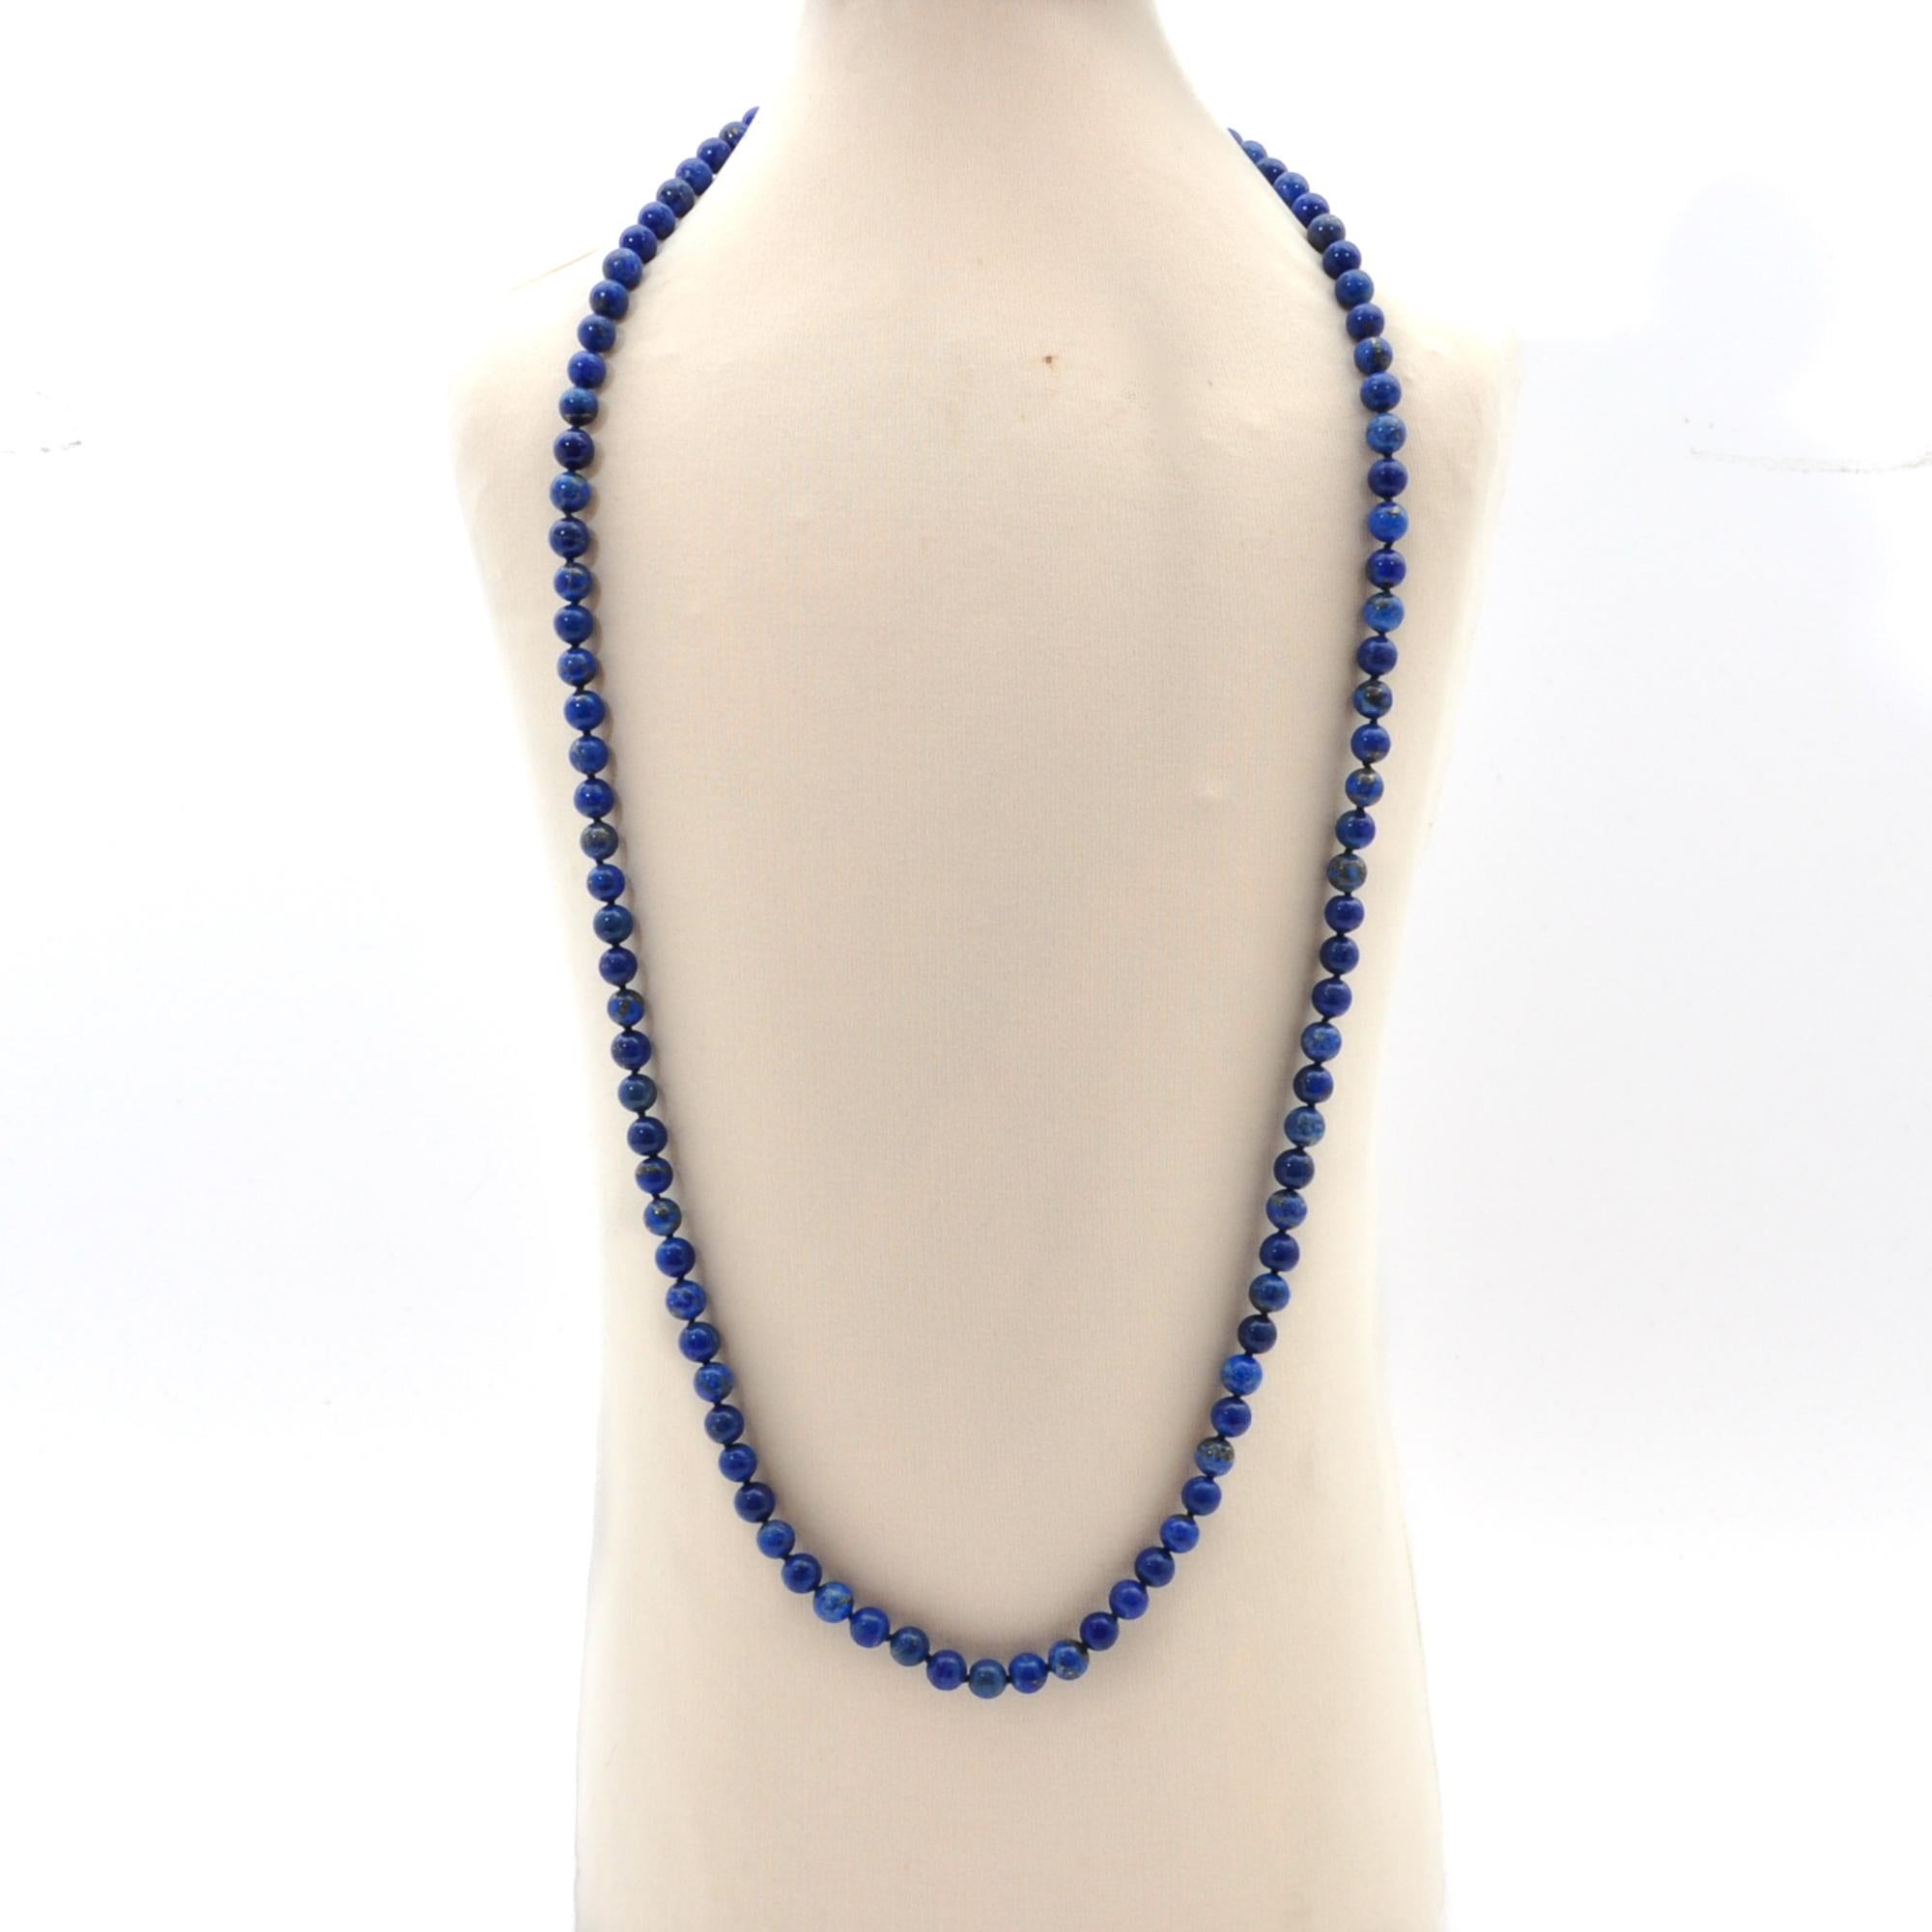 A Mid 20th Century lapis lazuli single strand necklace set with a gold ball clasp. The lapis lazuli is smoothly round polished and has a beautiful blue hue and in this royal blue color displaying shimmery spots of gold throughout. Between the beads